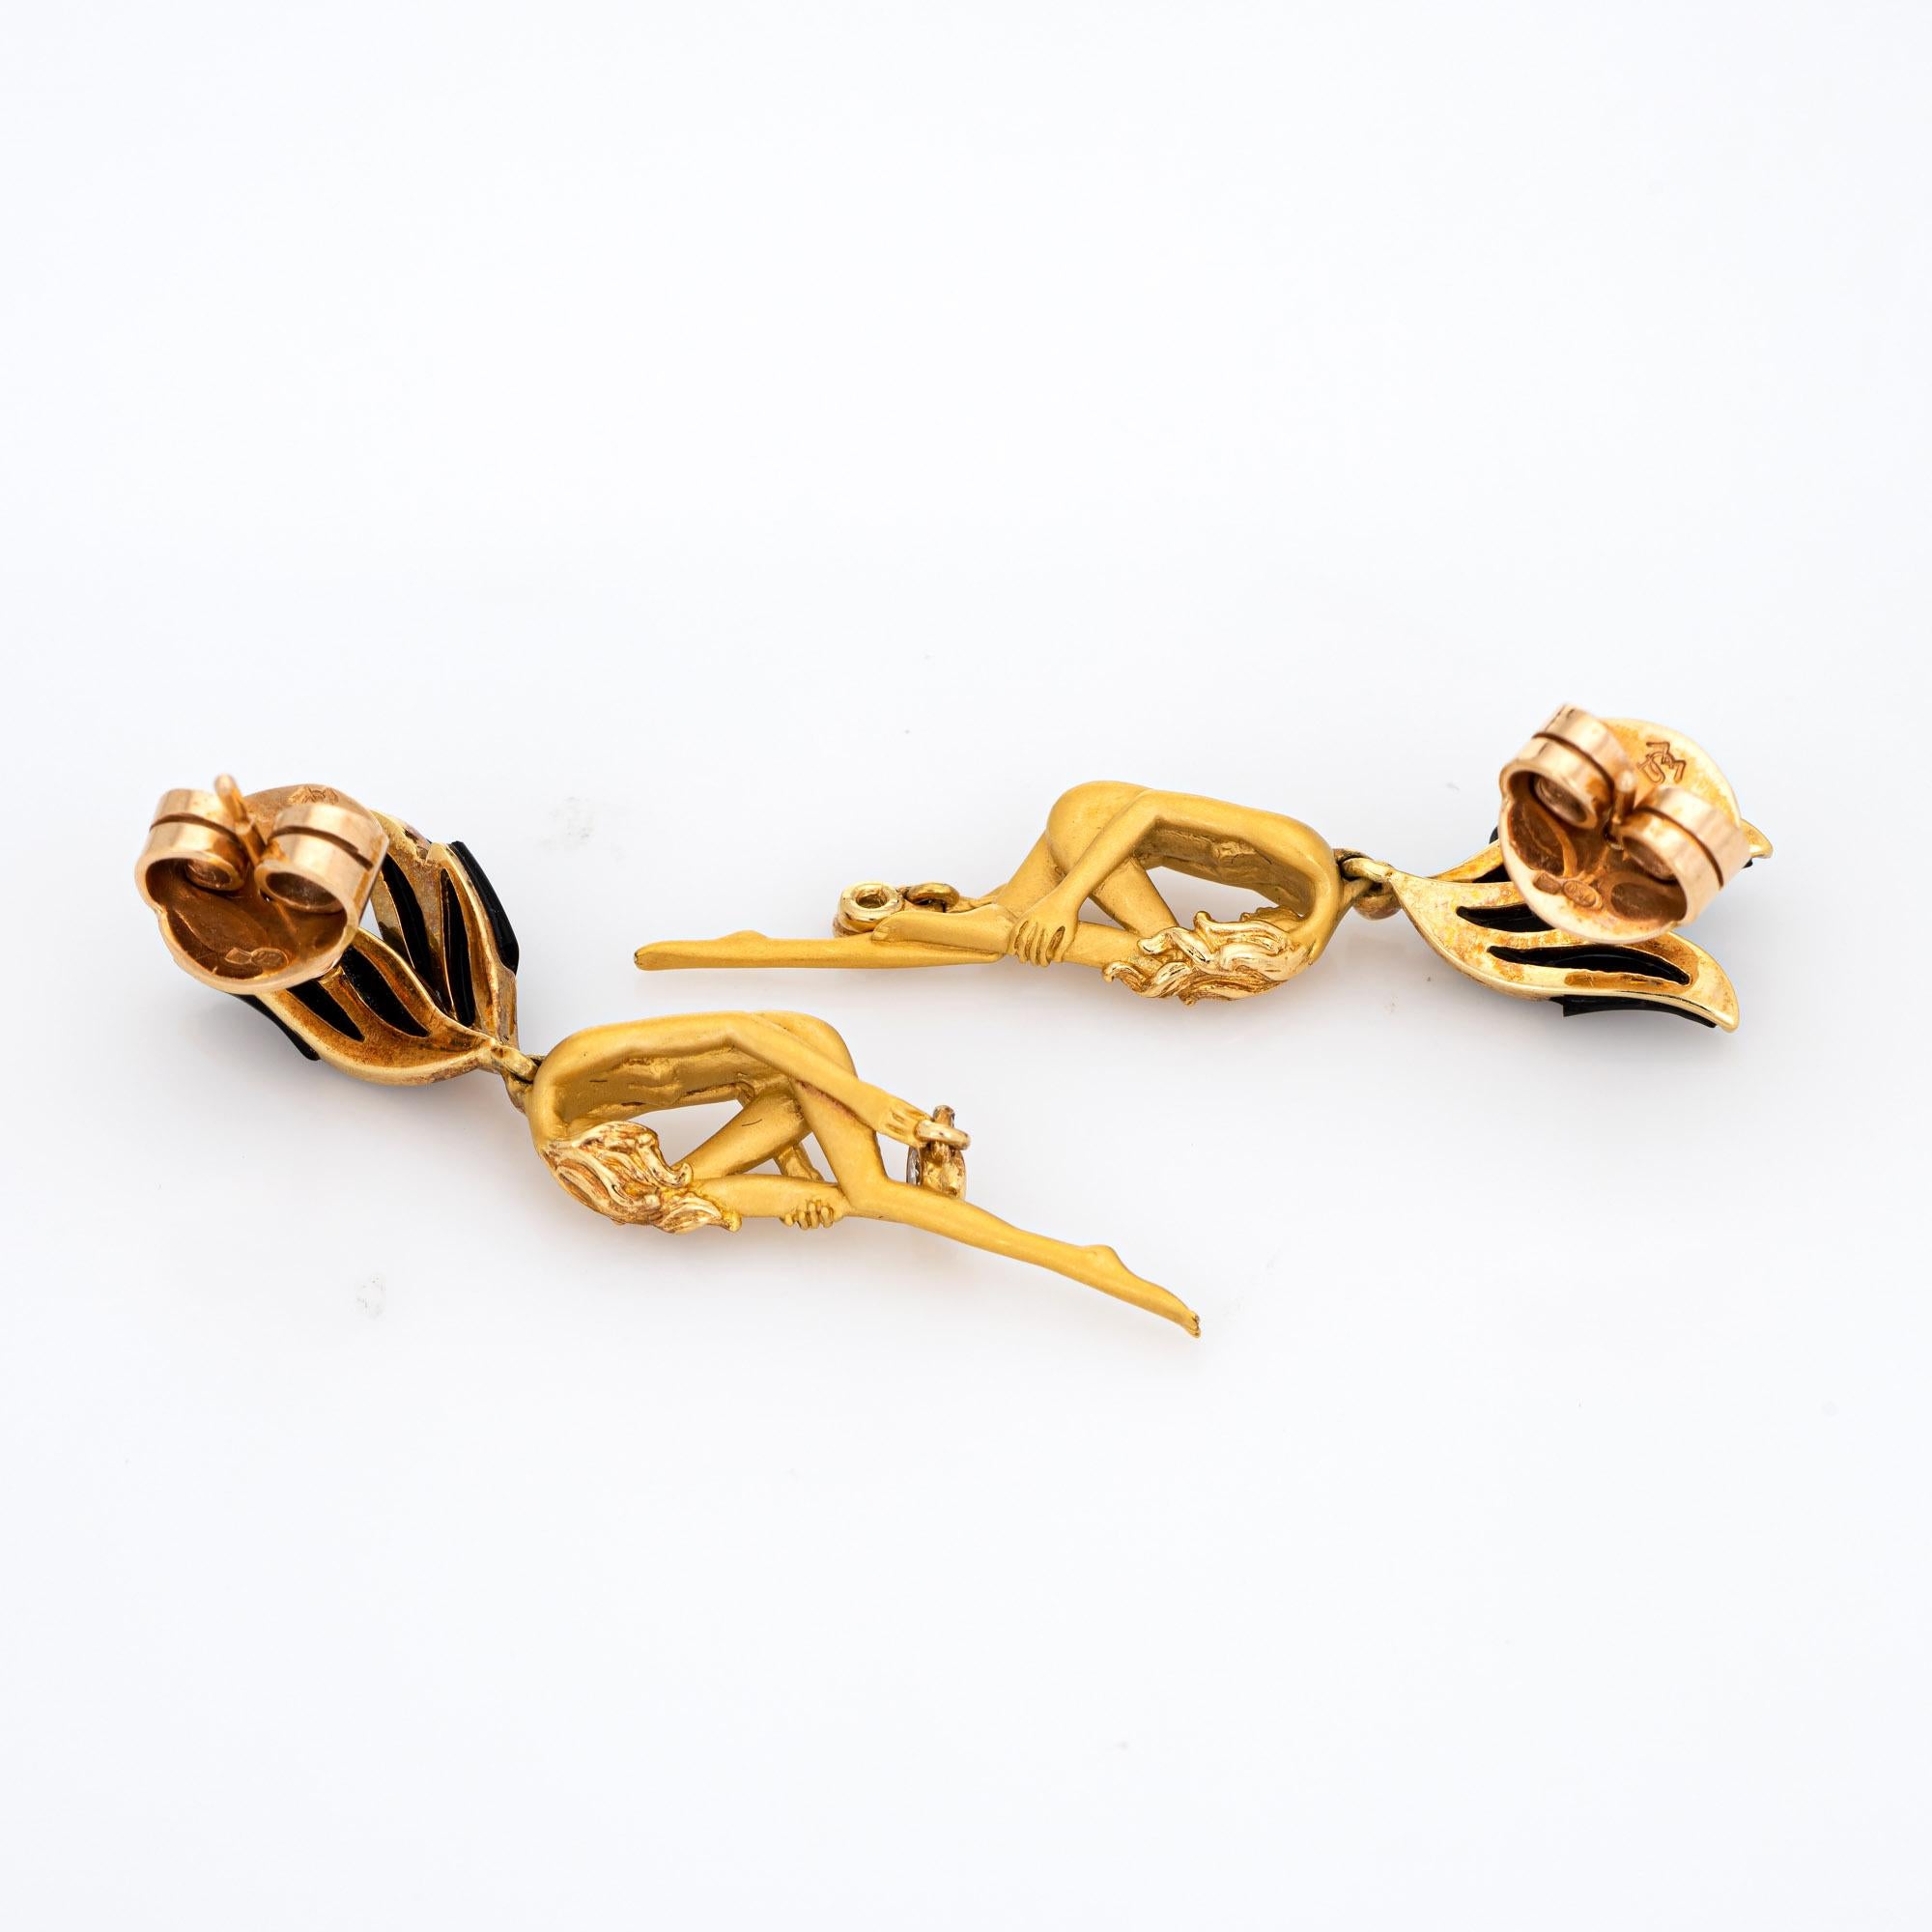 Elegant pair of pre-owned Carrera y Carrera winged fairy earrings crafted in 18k yellow gold. 

Four diamonds total an estimated 0.06 carats (estimated at G-H color and VVS2 clarity).  

The charming earrings by Carrera y Carrera highlight the